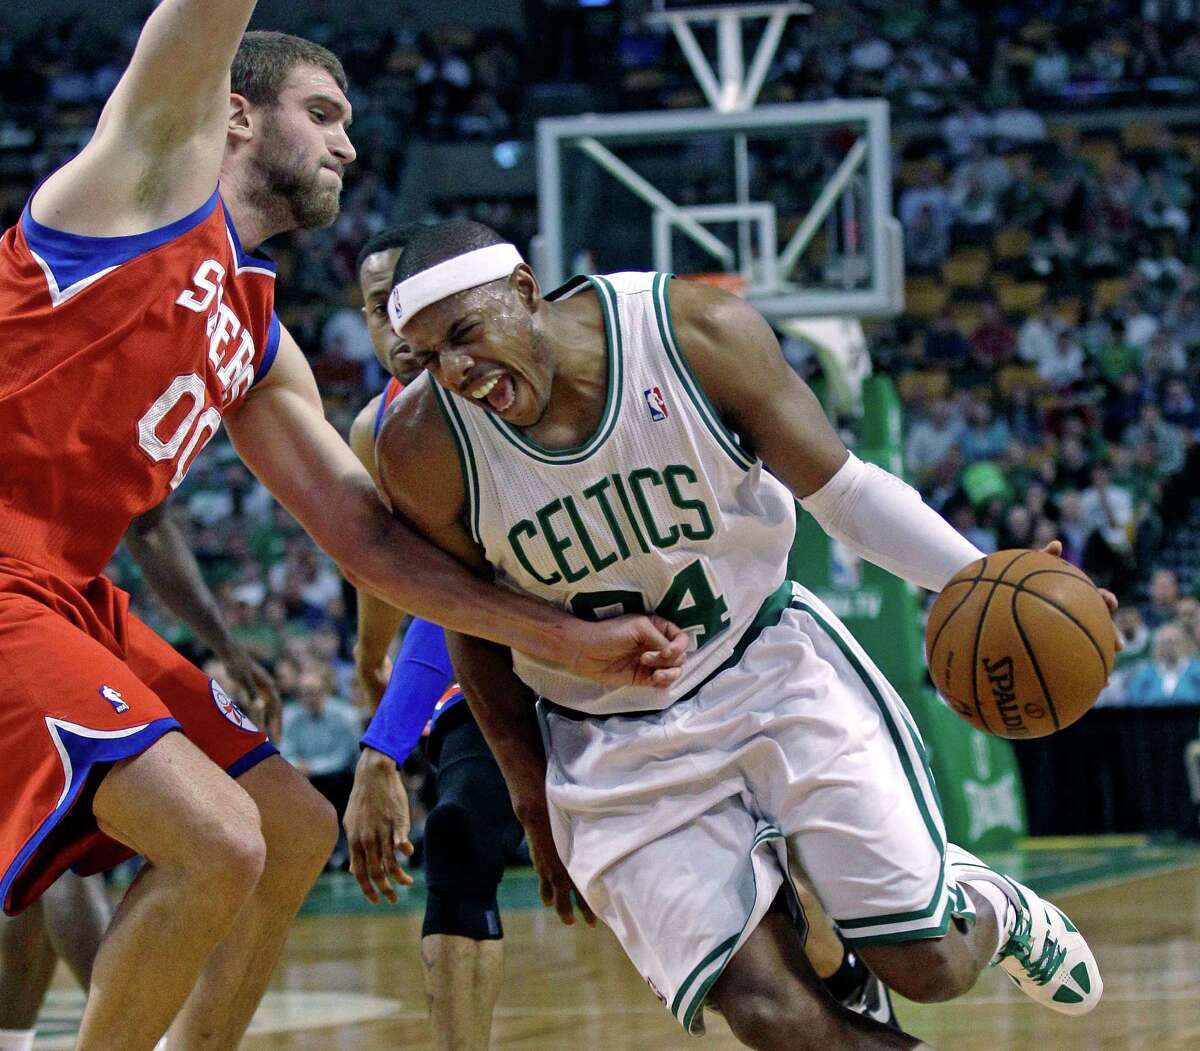 Boston Celtics' Paul Pierce, right, tries to drive past Philadelphia 76ers defender Spencer Hawes, left, during the first quarter of Game 5 in their NBA basketball Eastern Conference semifinal playoff series in Boston, Monday, May 21, 2012. The Celtics won 101-85 to take a 3-2 series lead. (AP Photo/Charles Krupa)